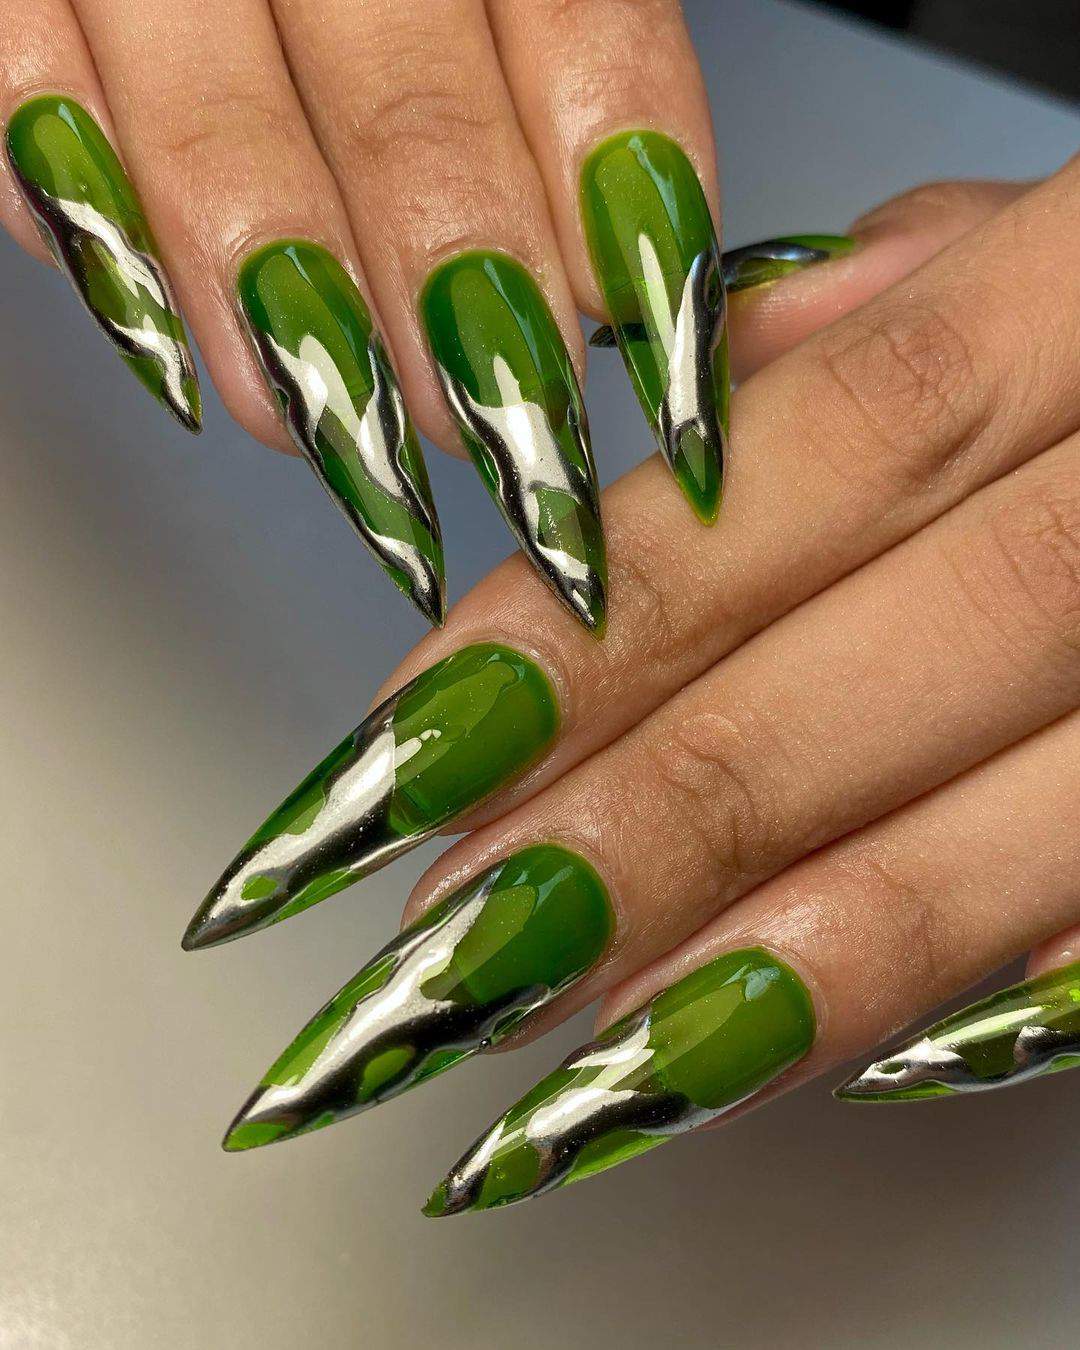 50 Best Nail Designs Trends To Try Out In 2022 images 3